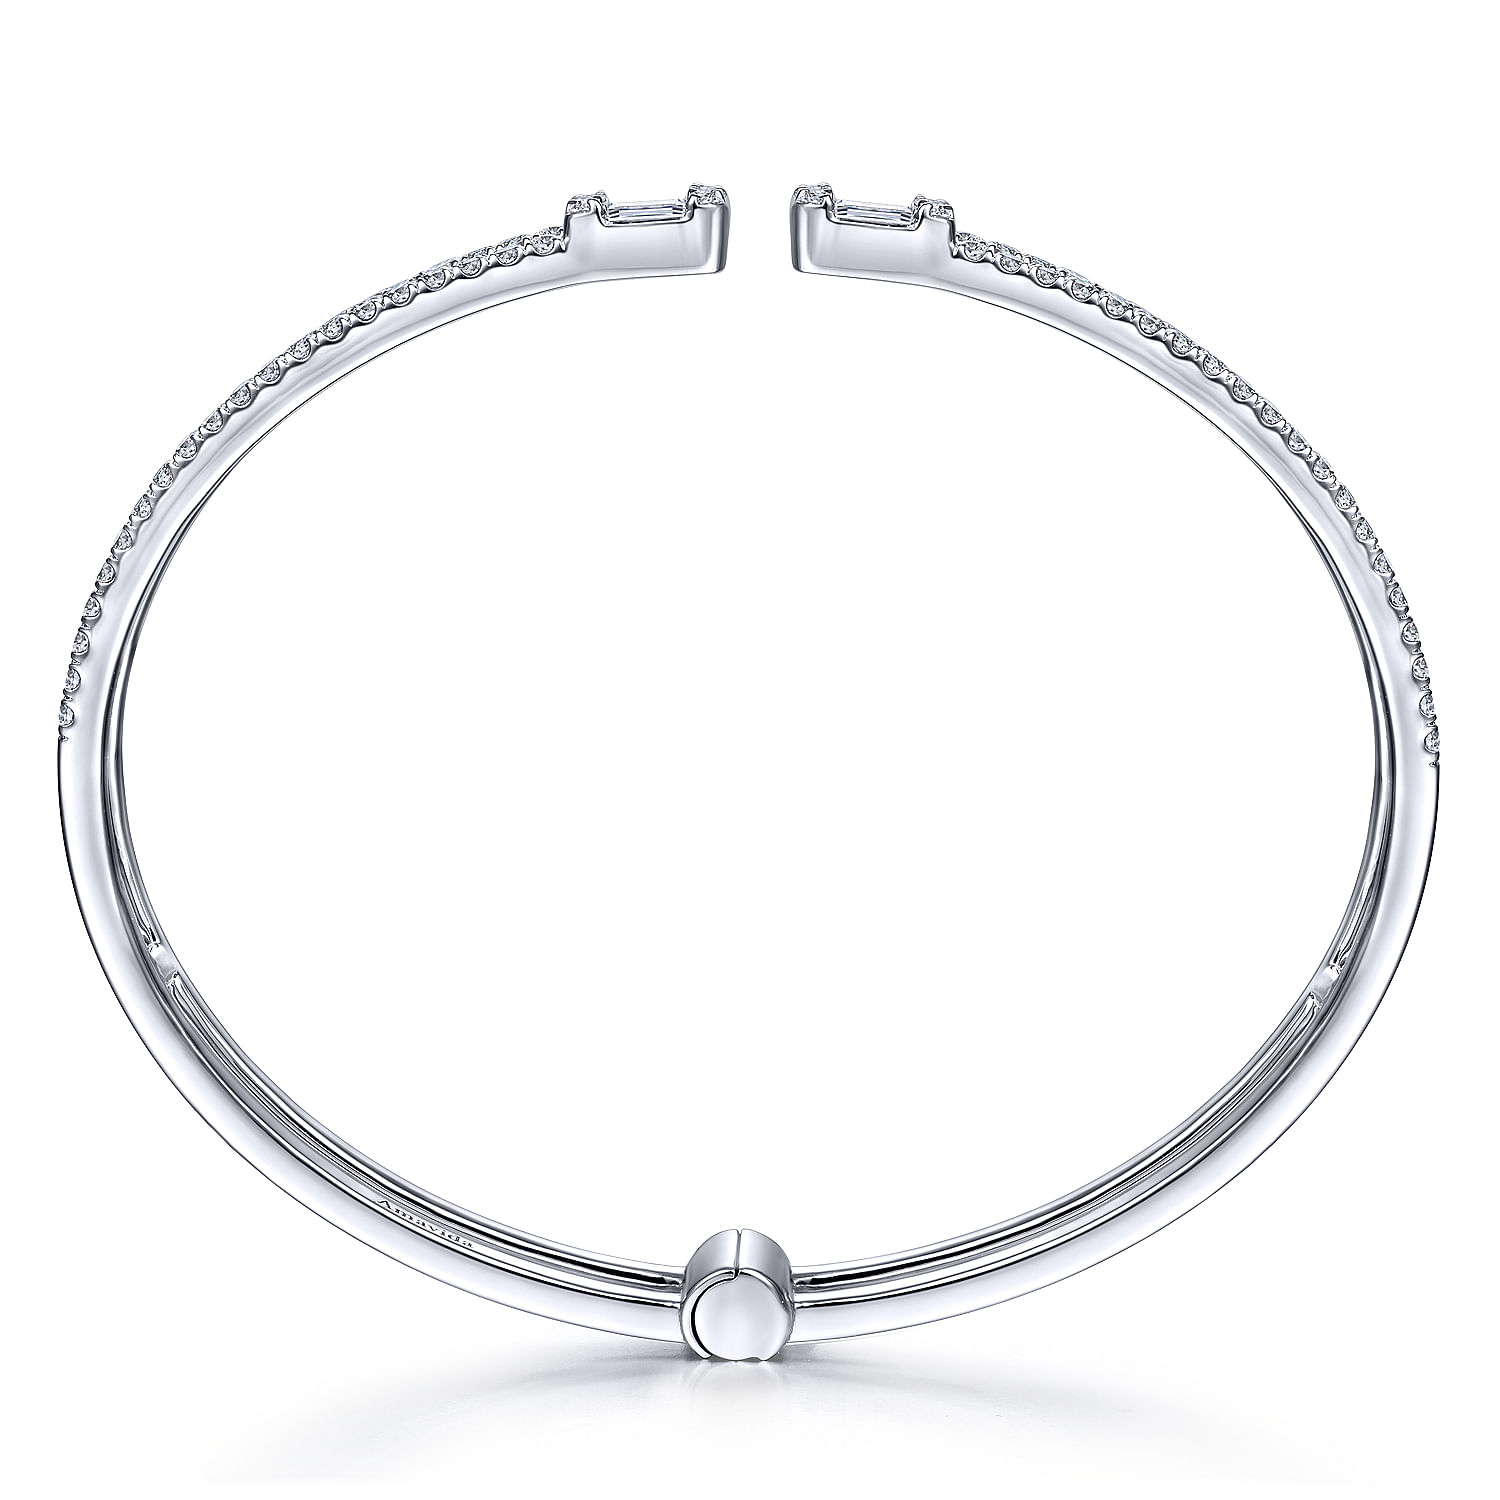 18K White Gold Open Cuff Bracelet with Baguette and Round Diamonds